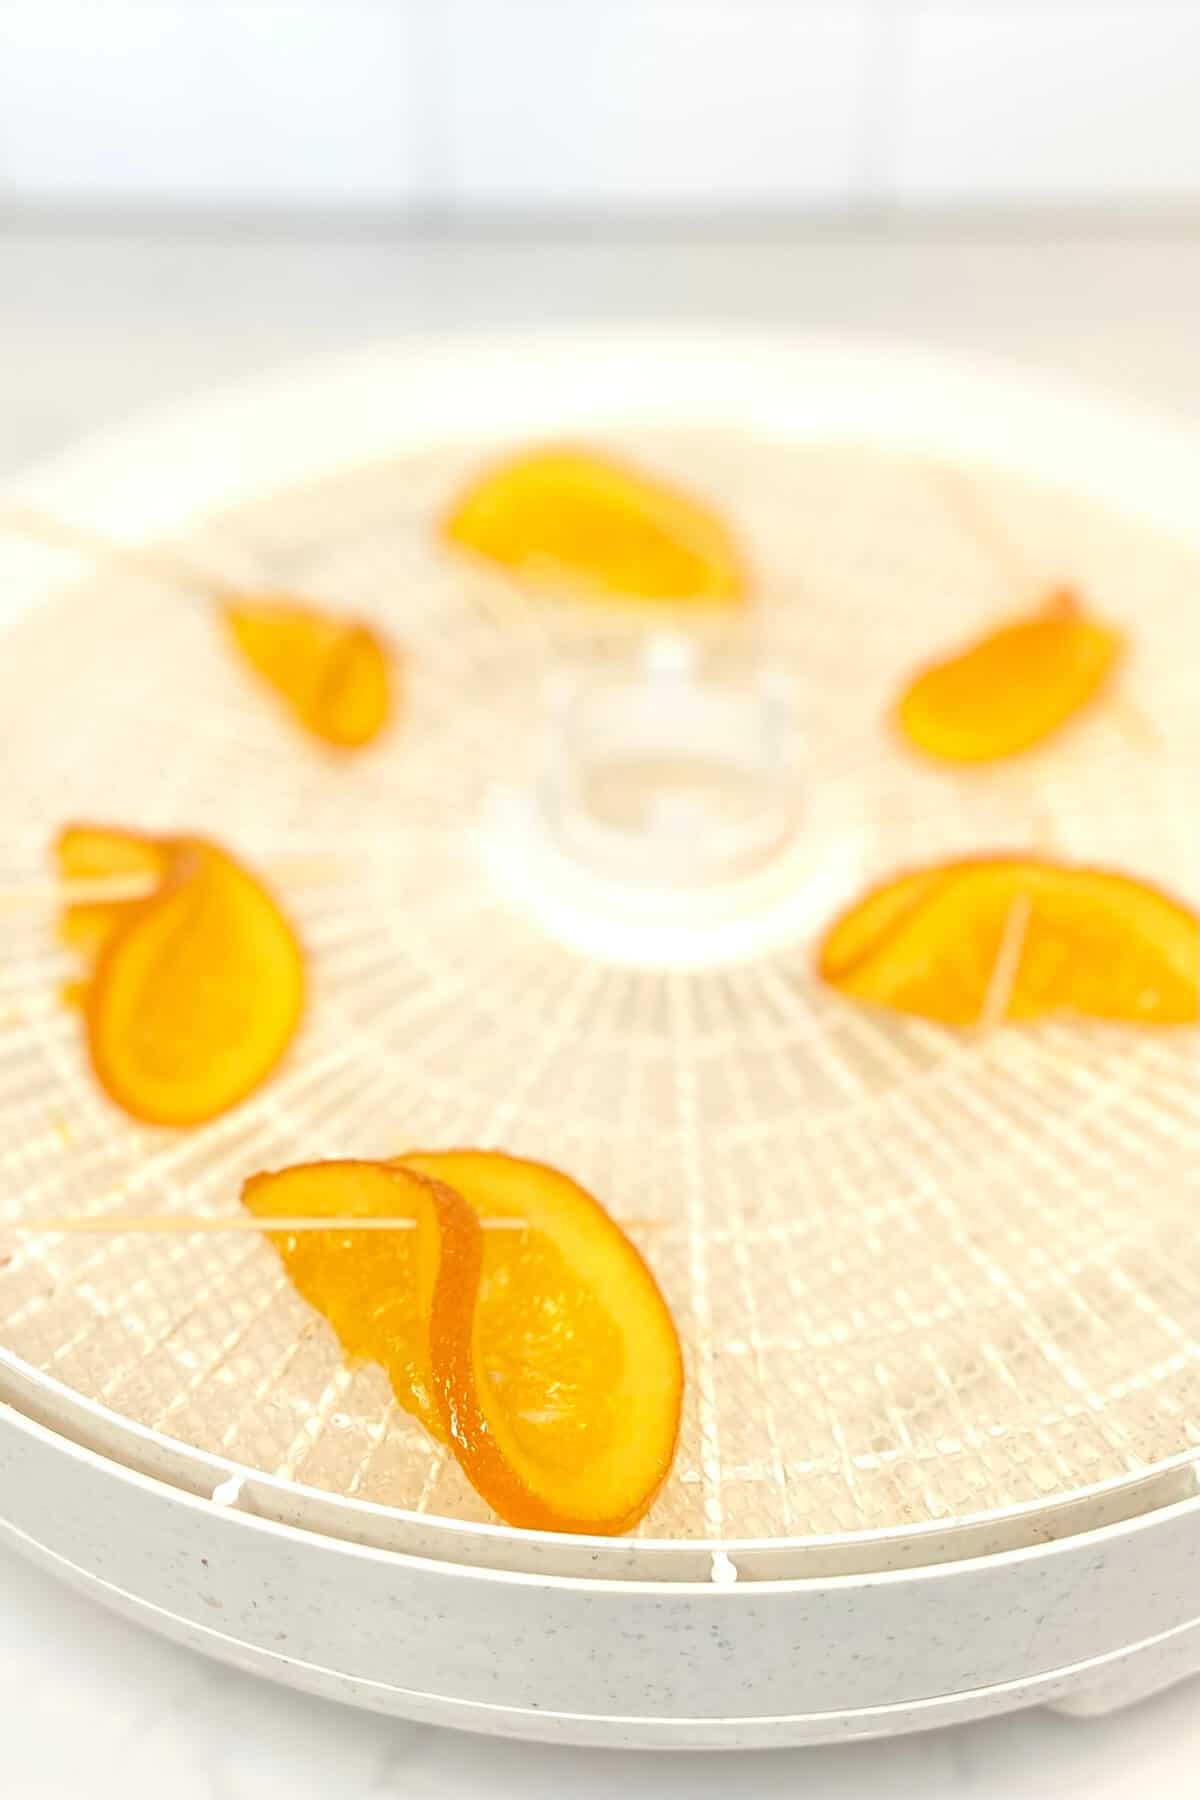 Orange slices curled, with toothpicks holding them in position.